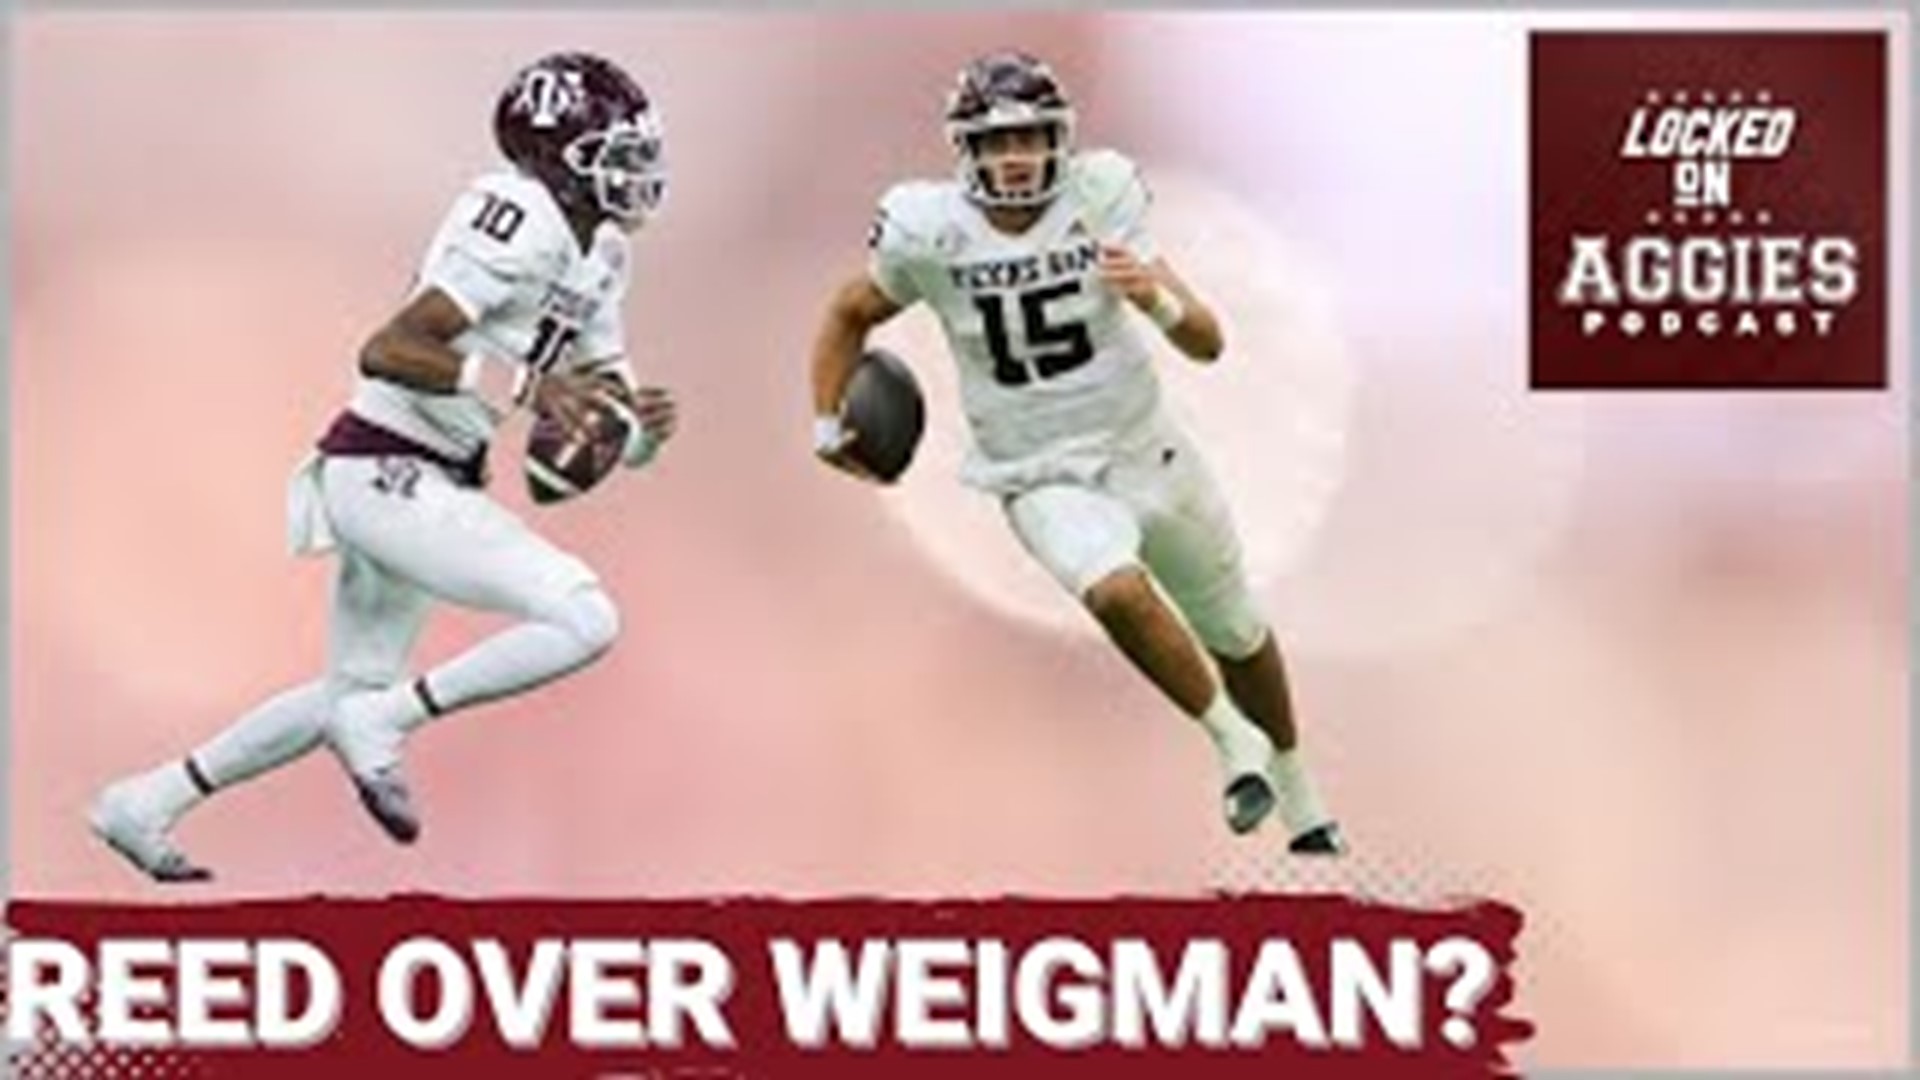 On today's episode of Locked On Aggies, host Andrew Stefaniak talks about Texas A&M's spring game and who could be the MVP in different positions.